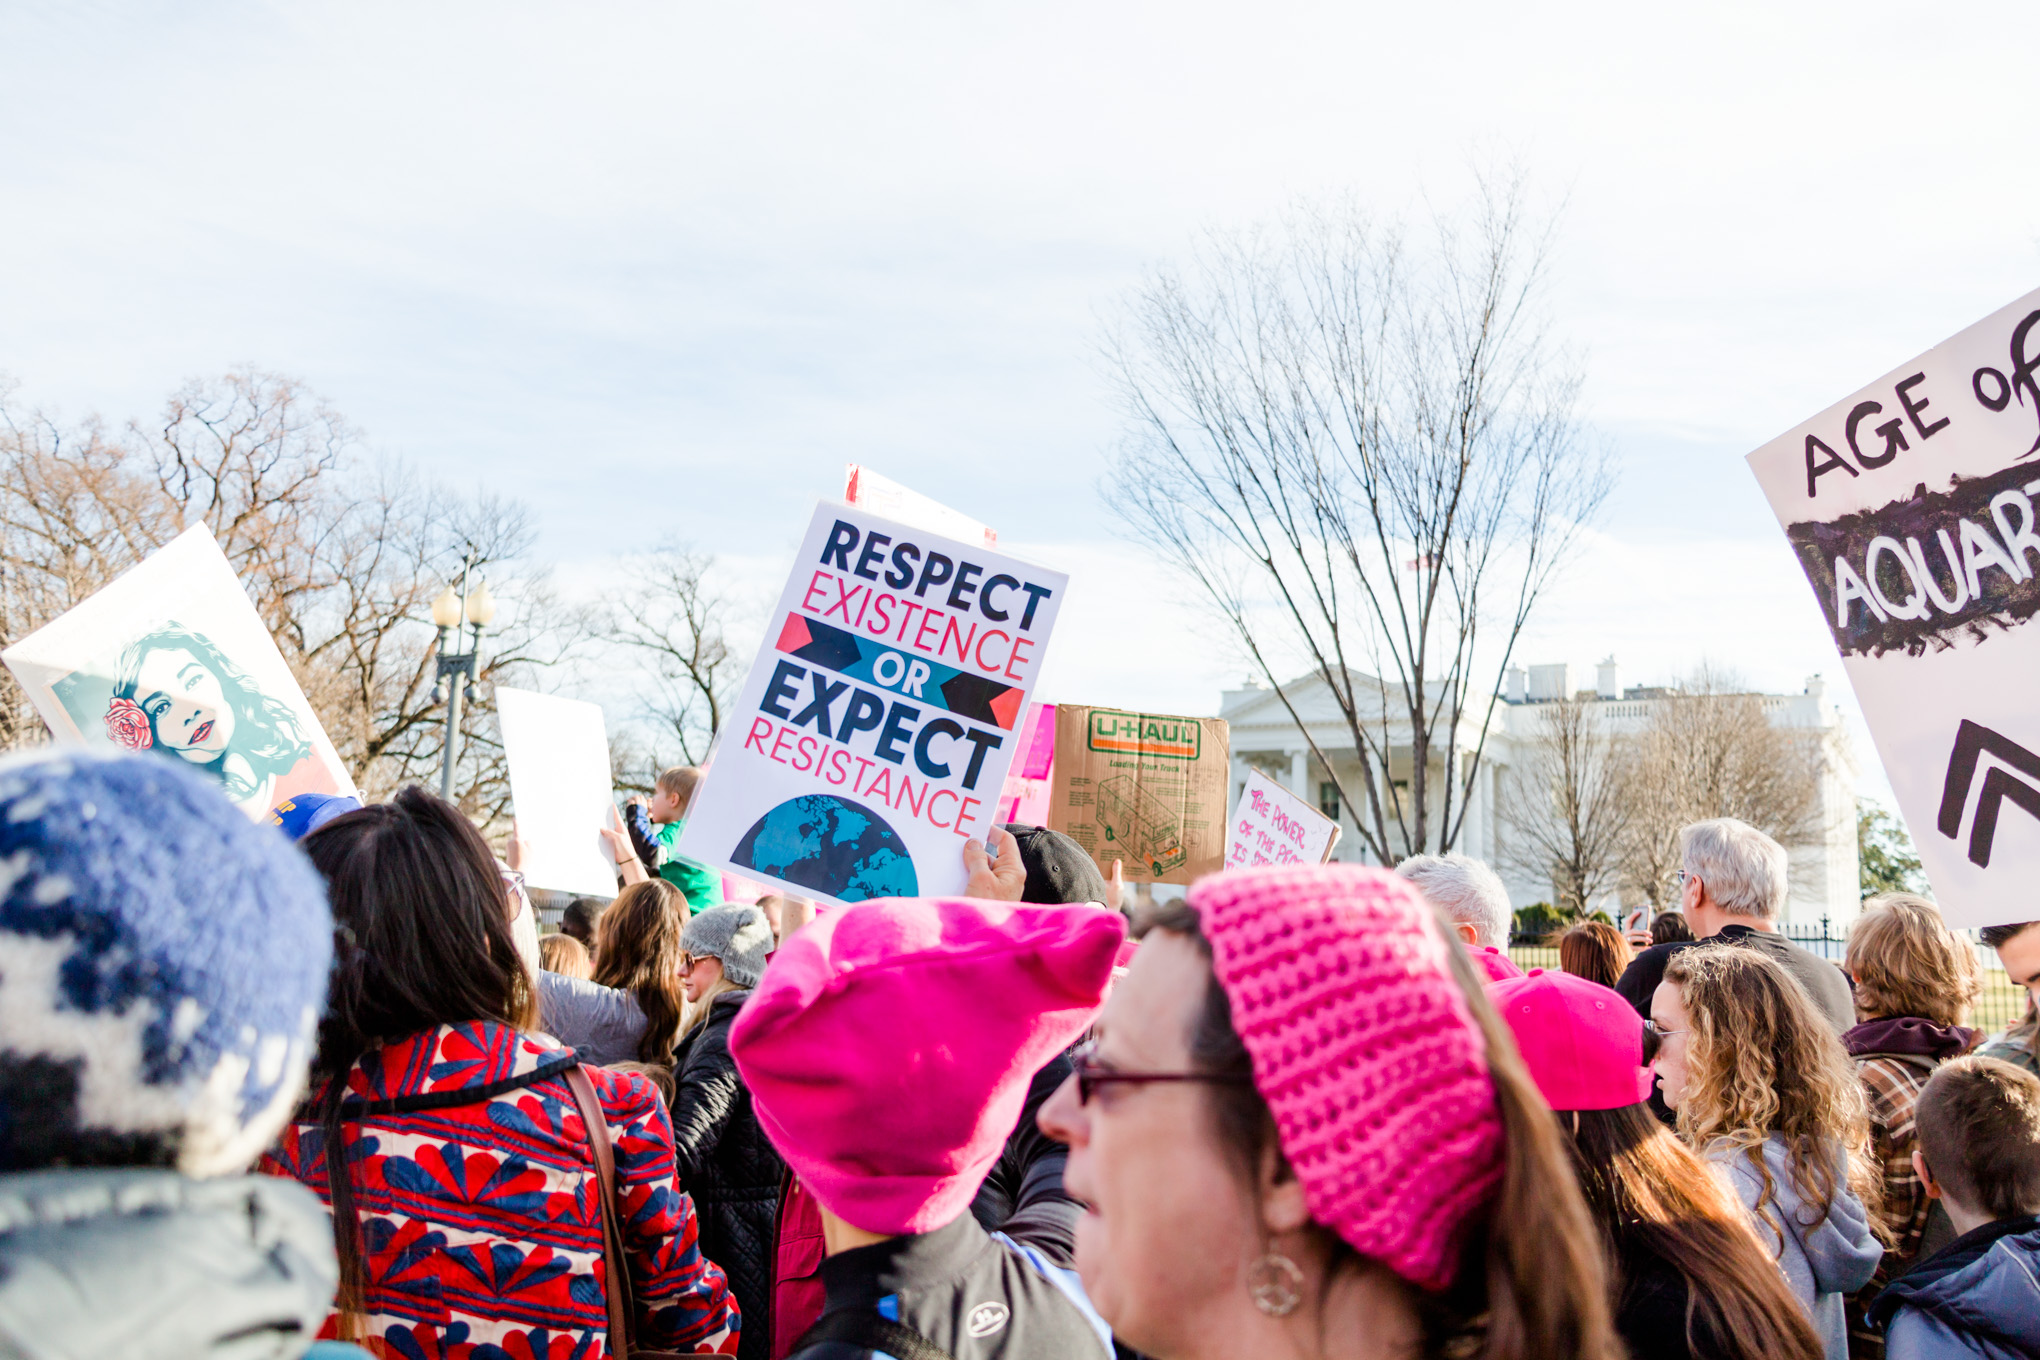 DC Women's March, Women's March, Washington, DC, photo journalism, January 2018, White House, protest, protest sings